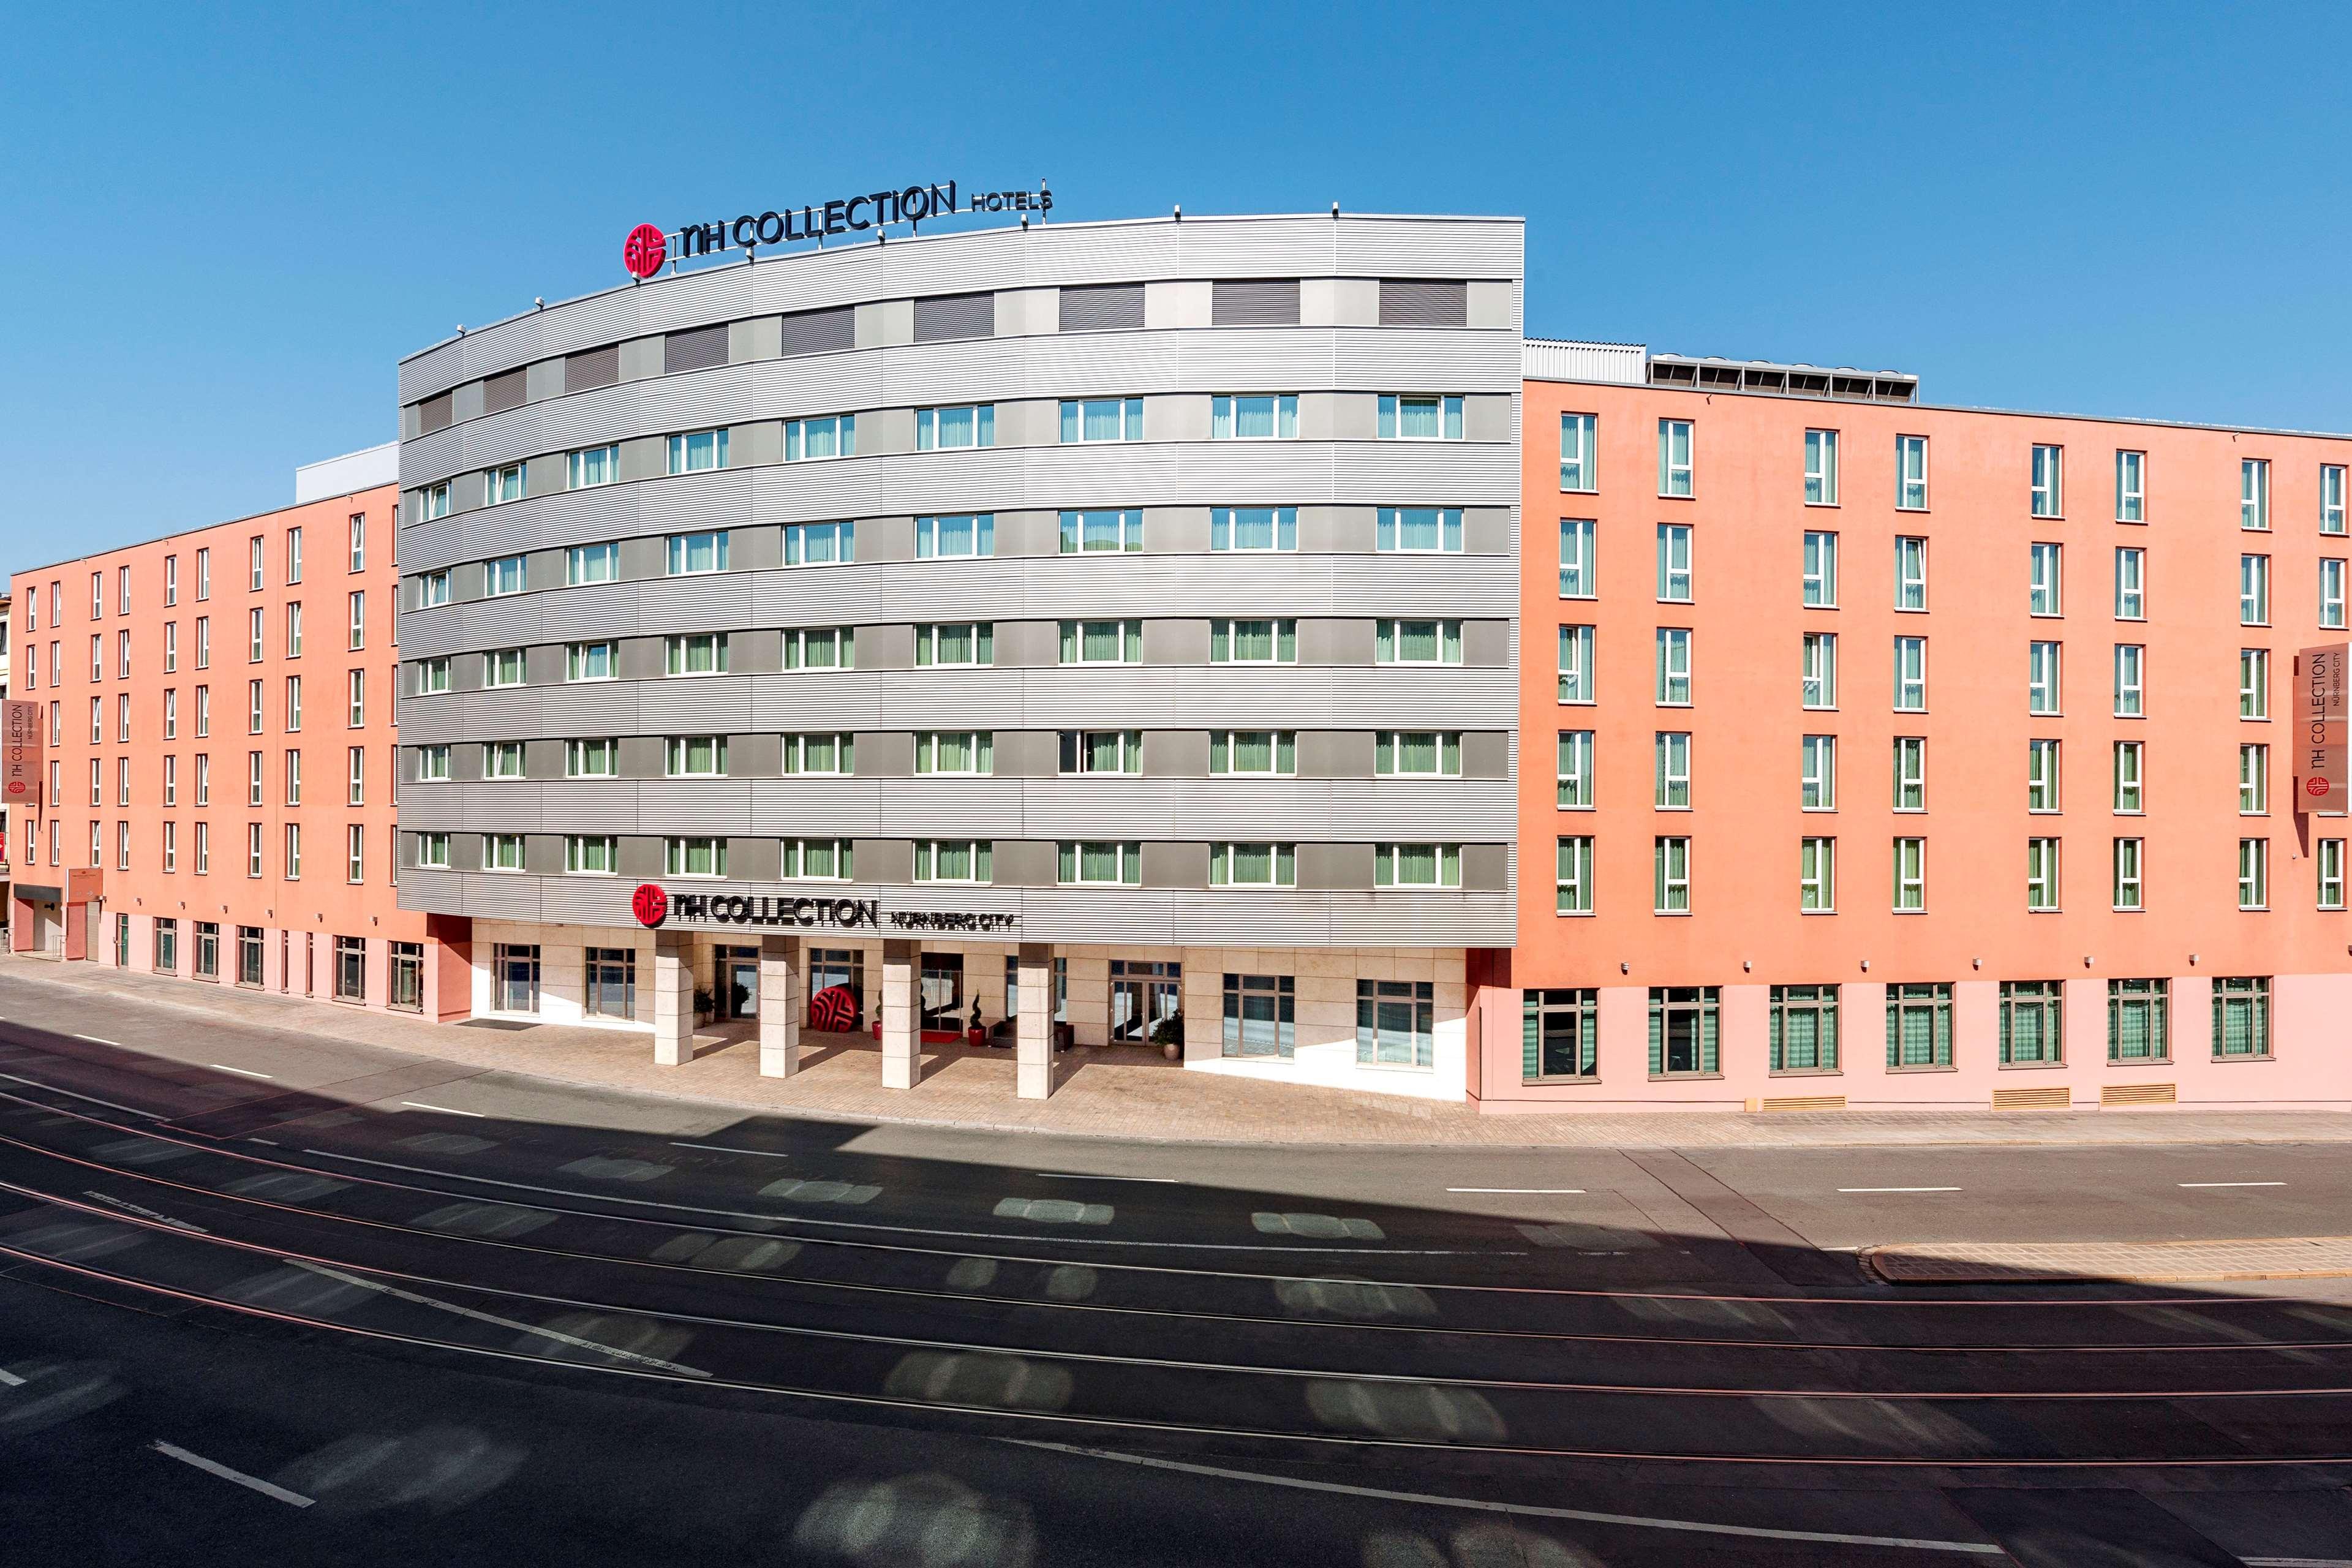 Nh Collection Nurnberg City Exterior foto